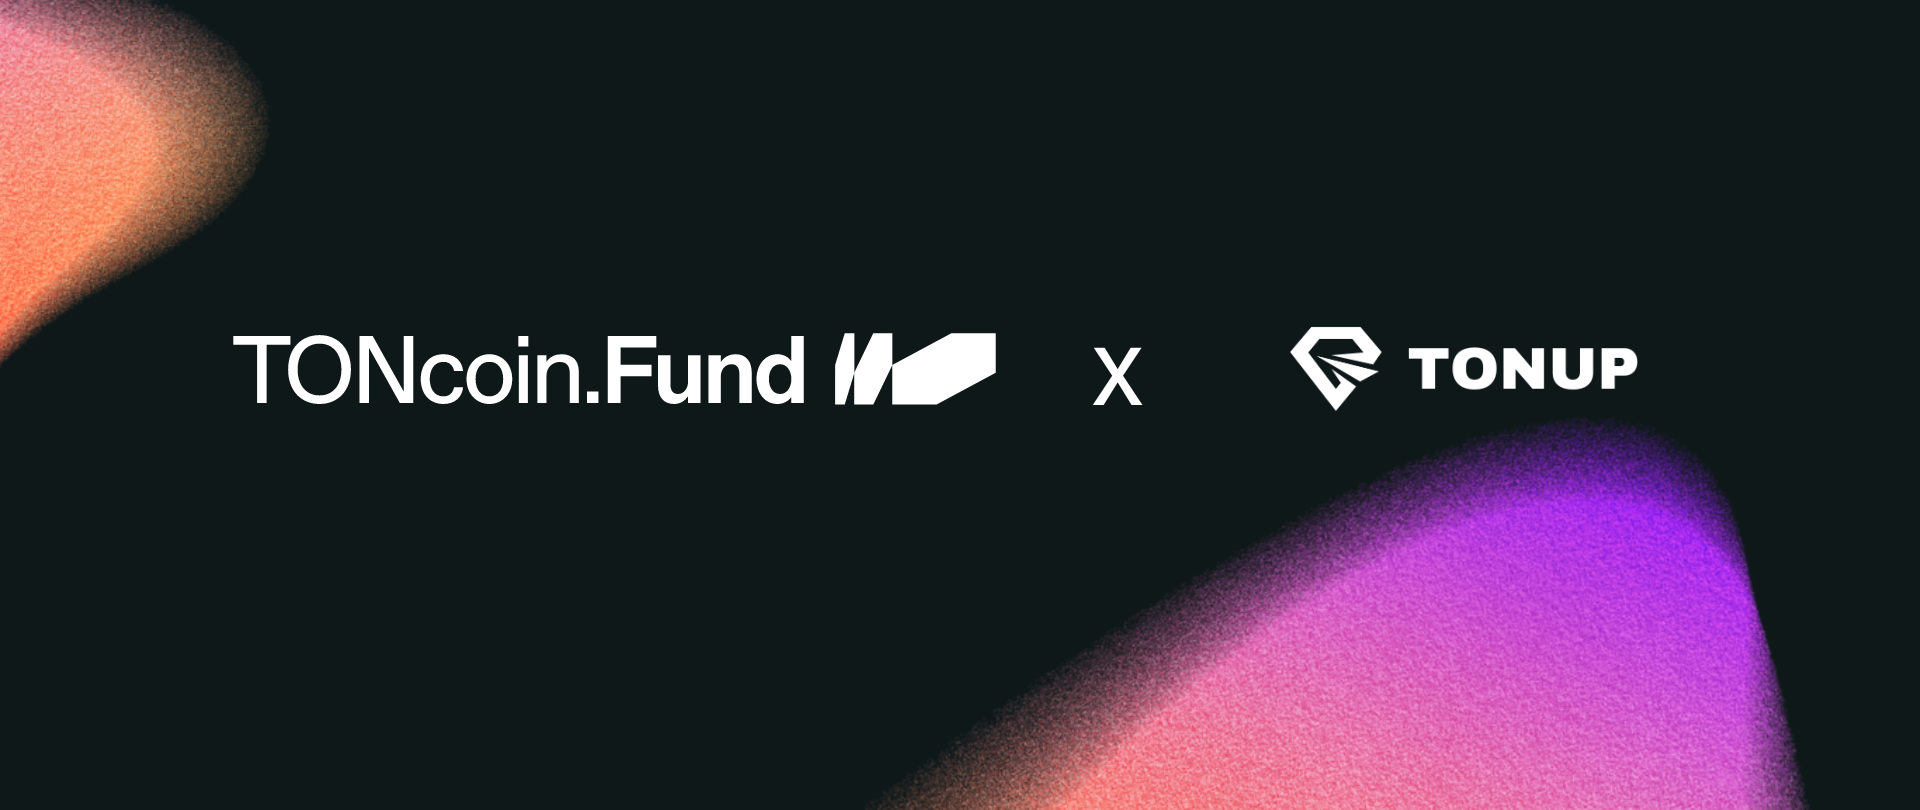 TONcoinFund-X-TonUP.png